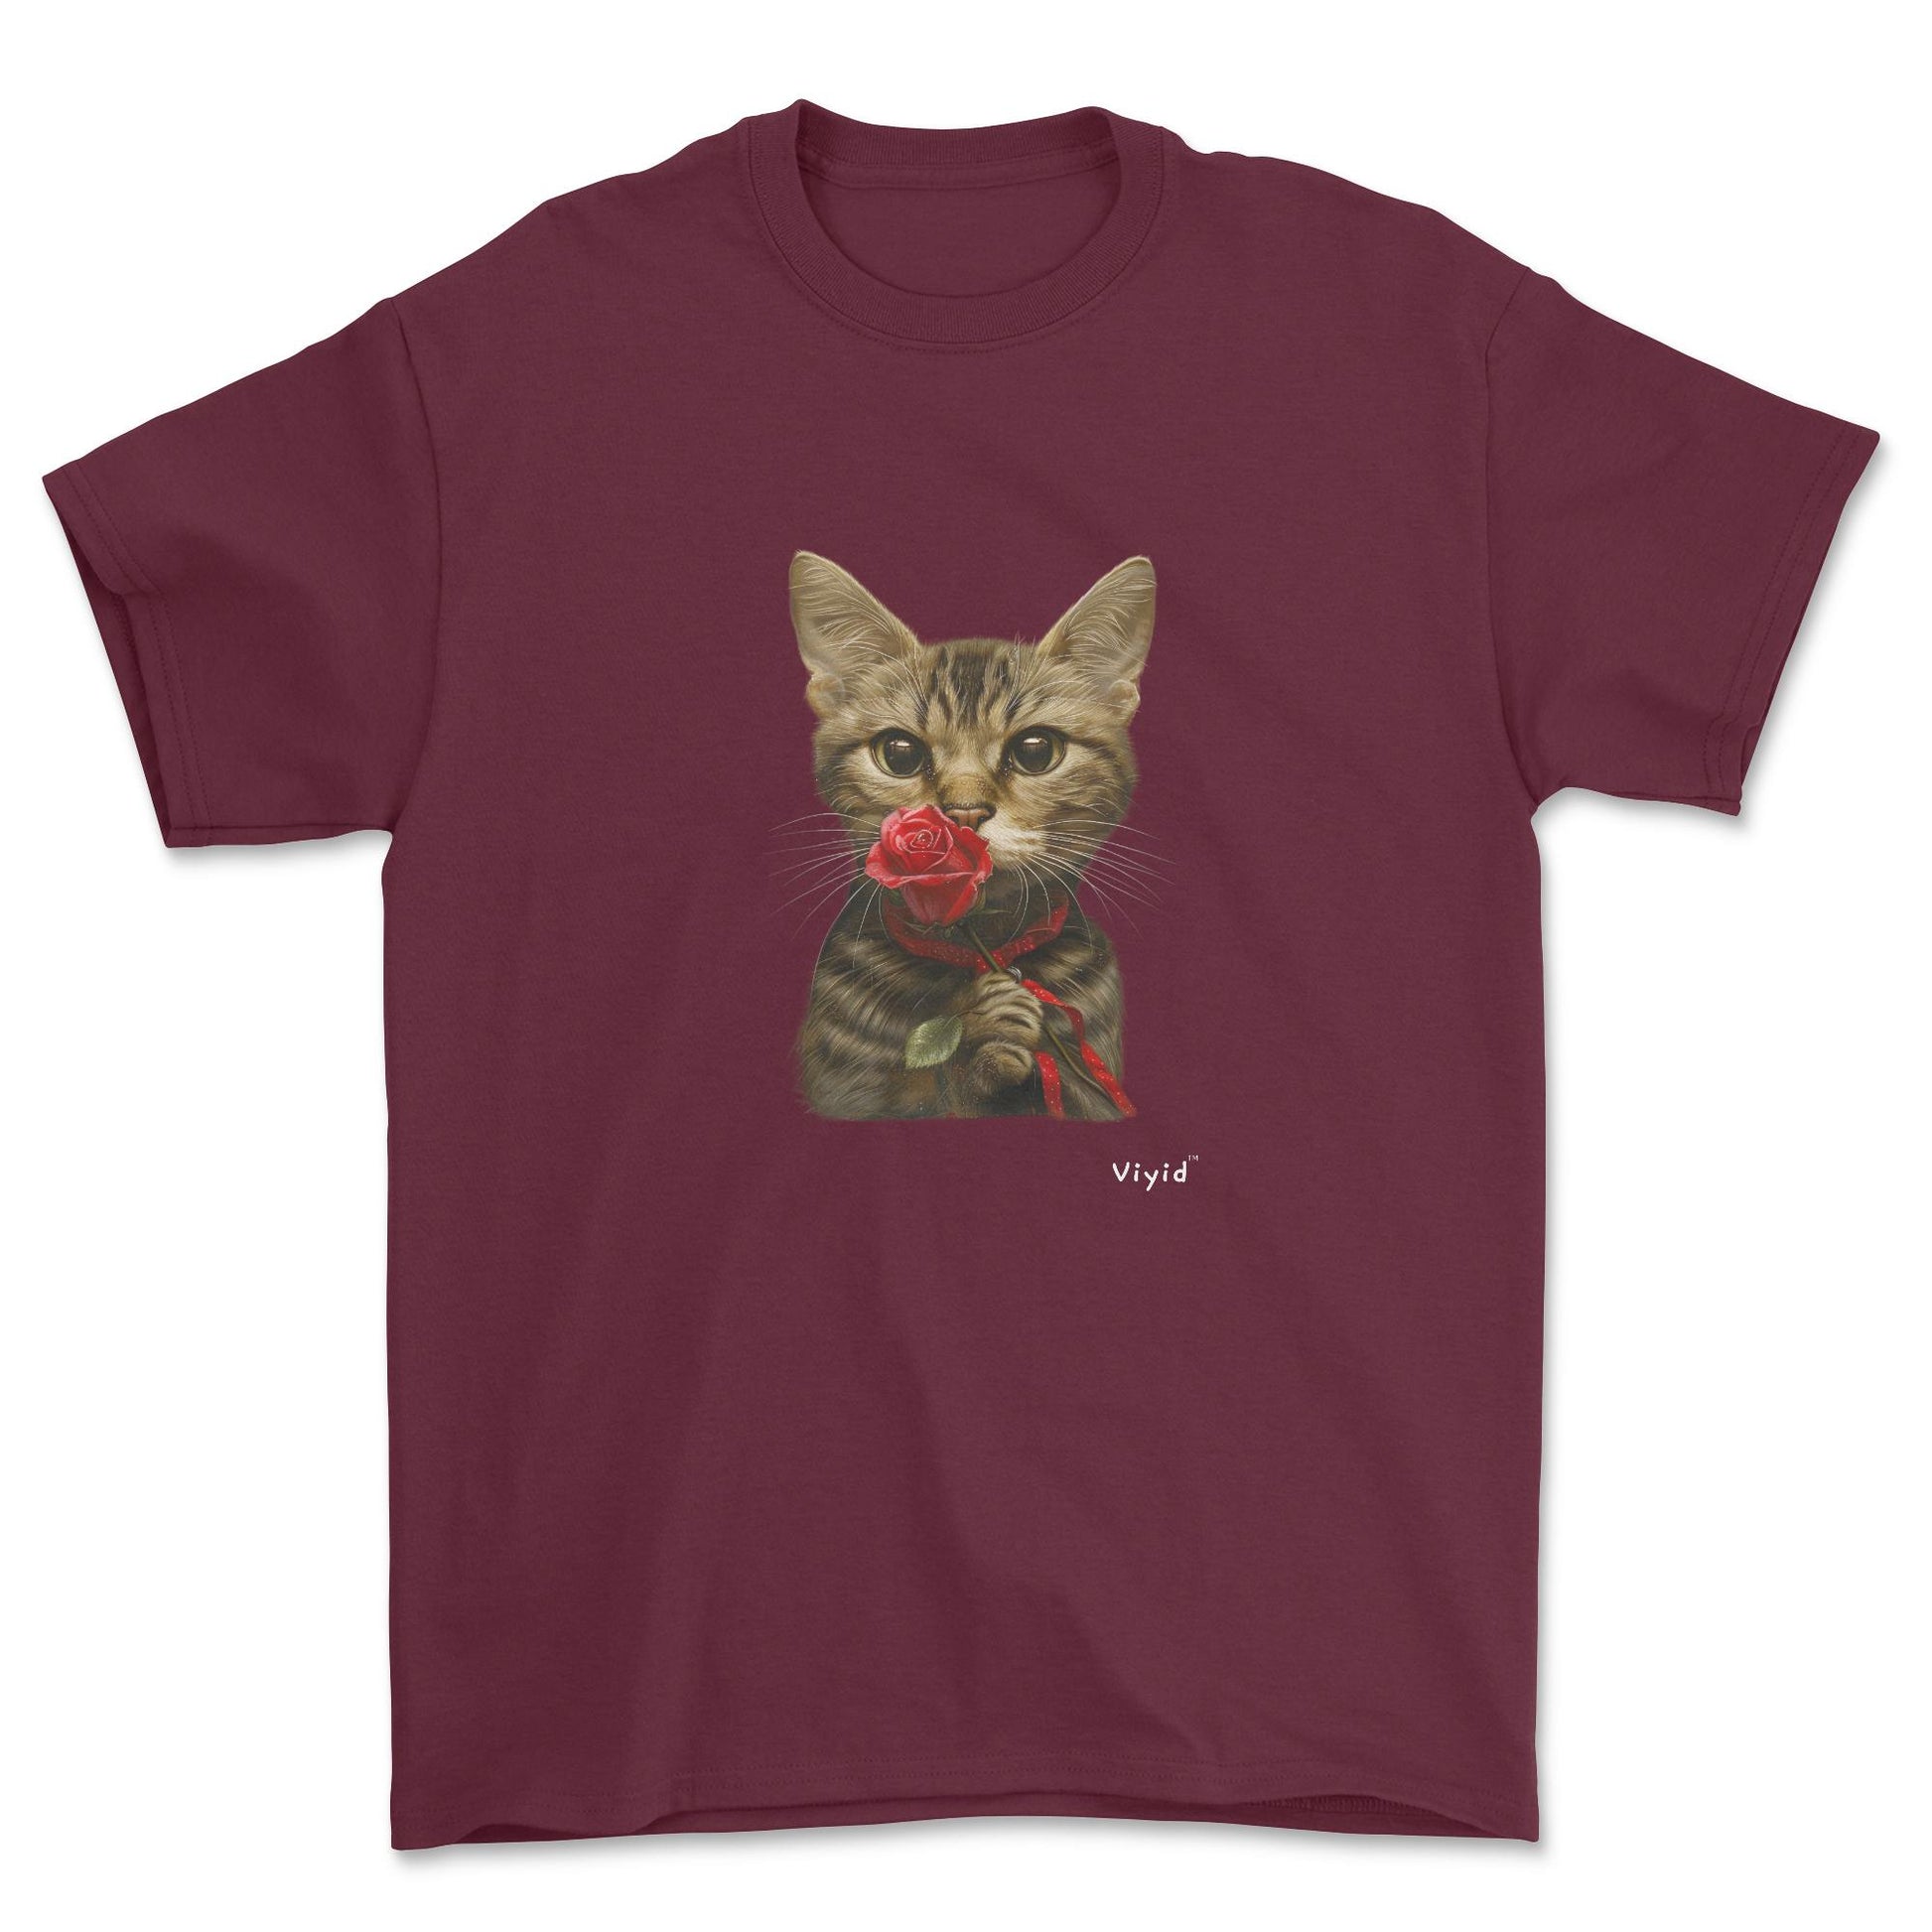 sniffing rose domestic shorthair cat adult t-shirt maroon